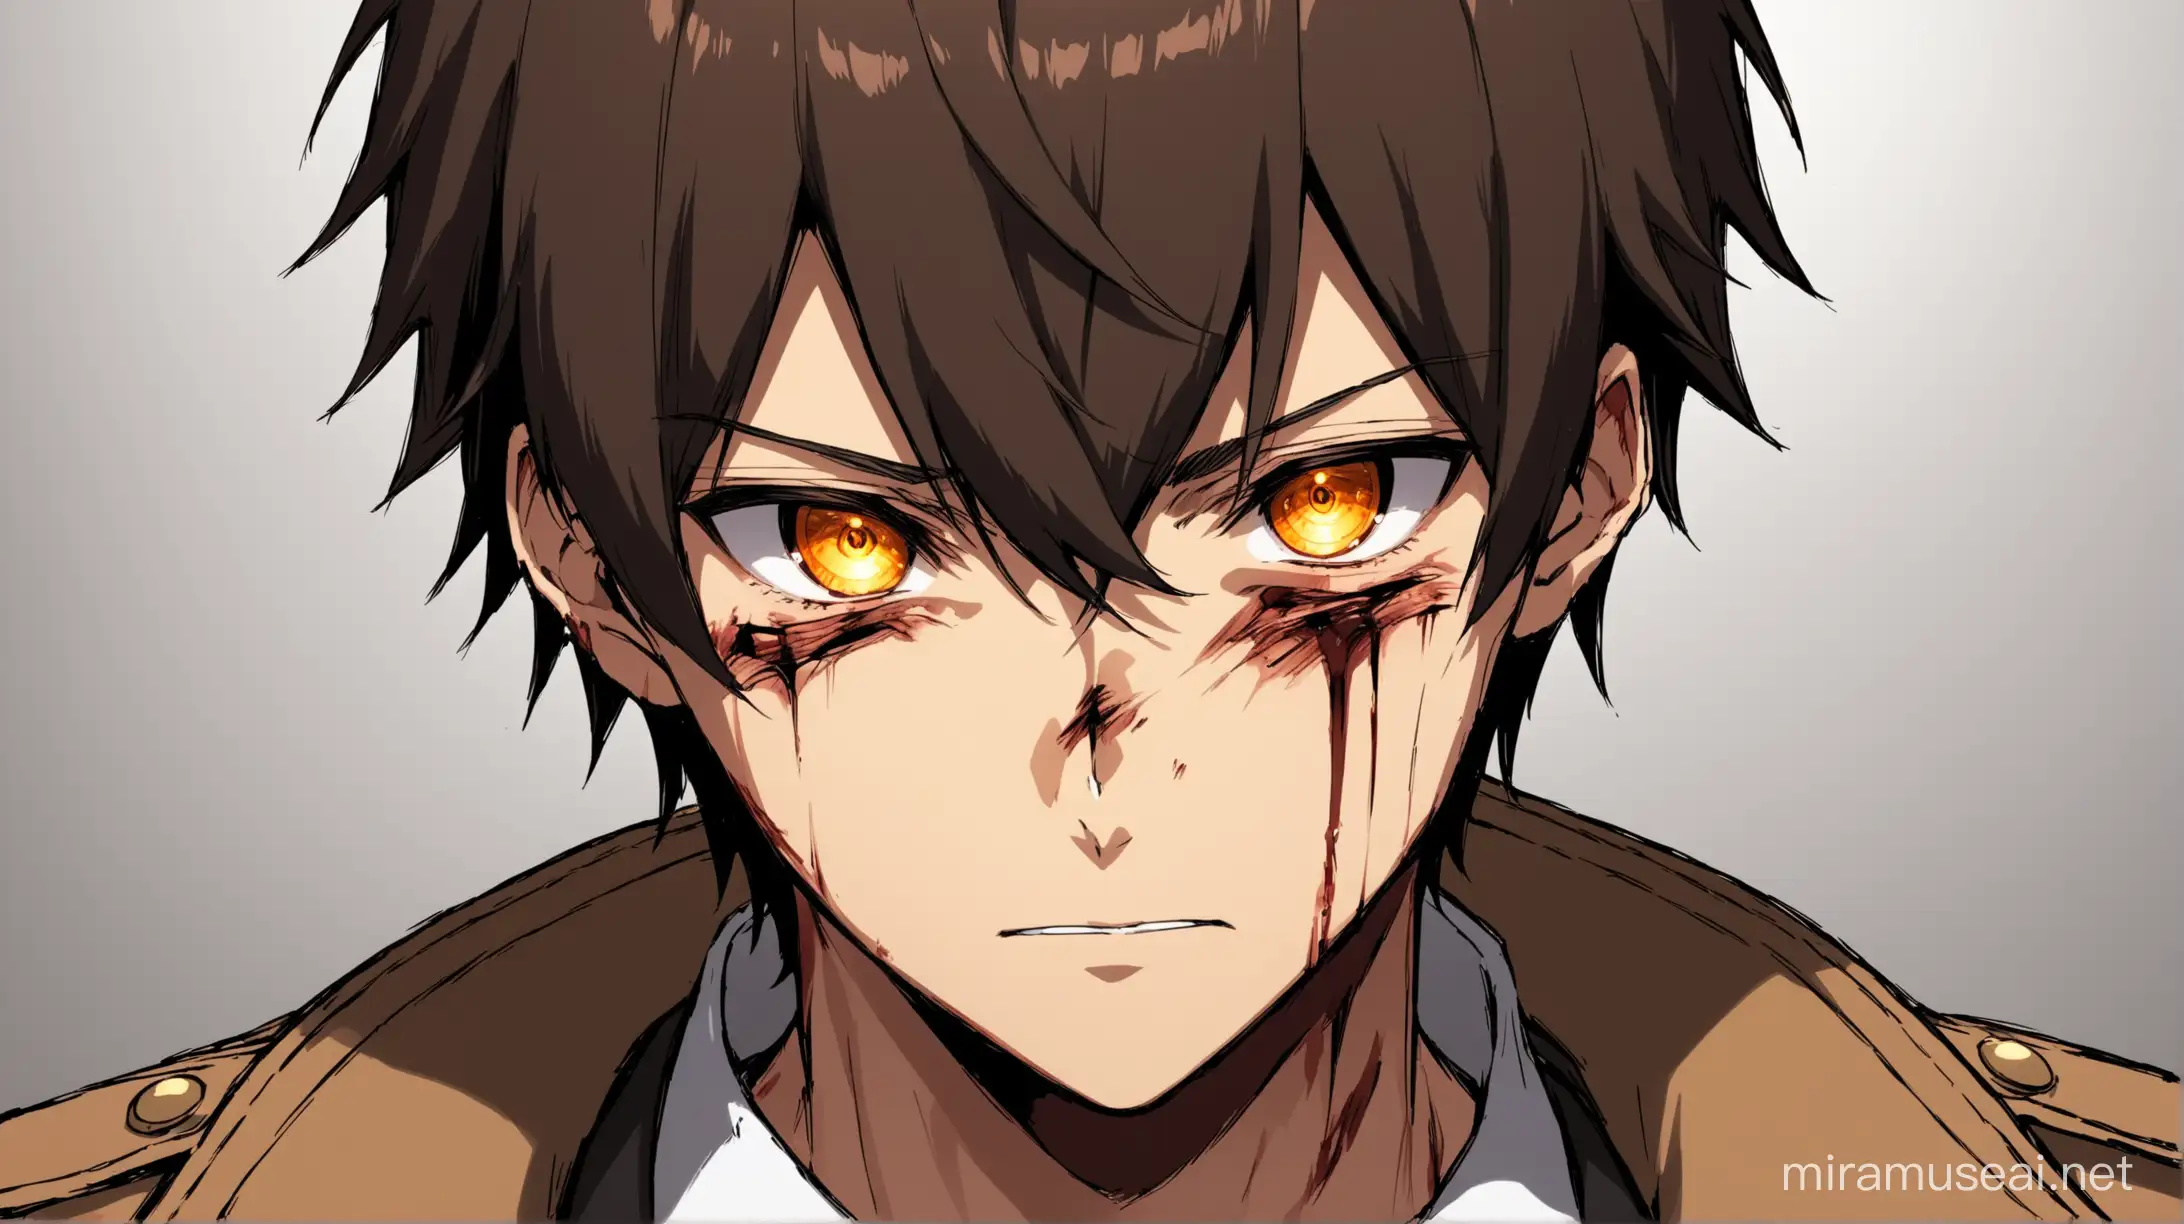 Anime Male Detective with Injured Face